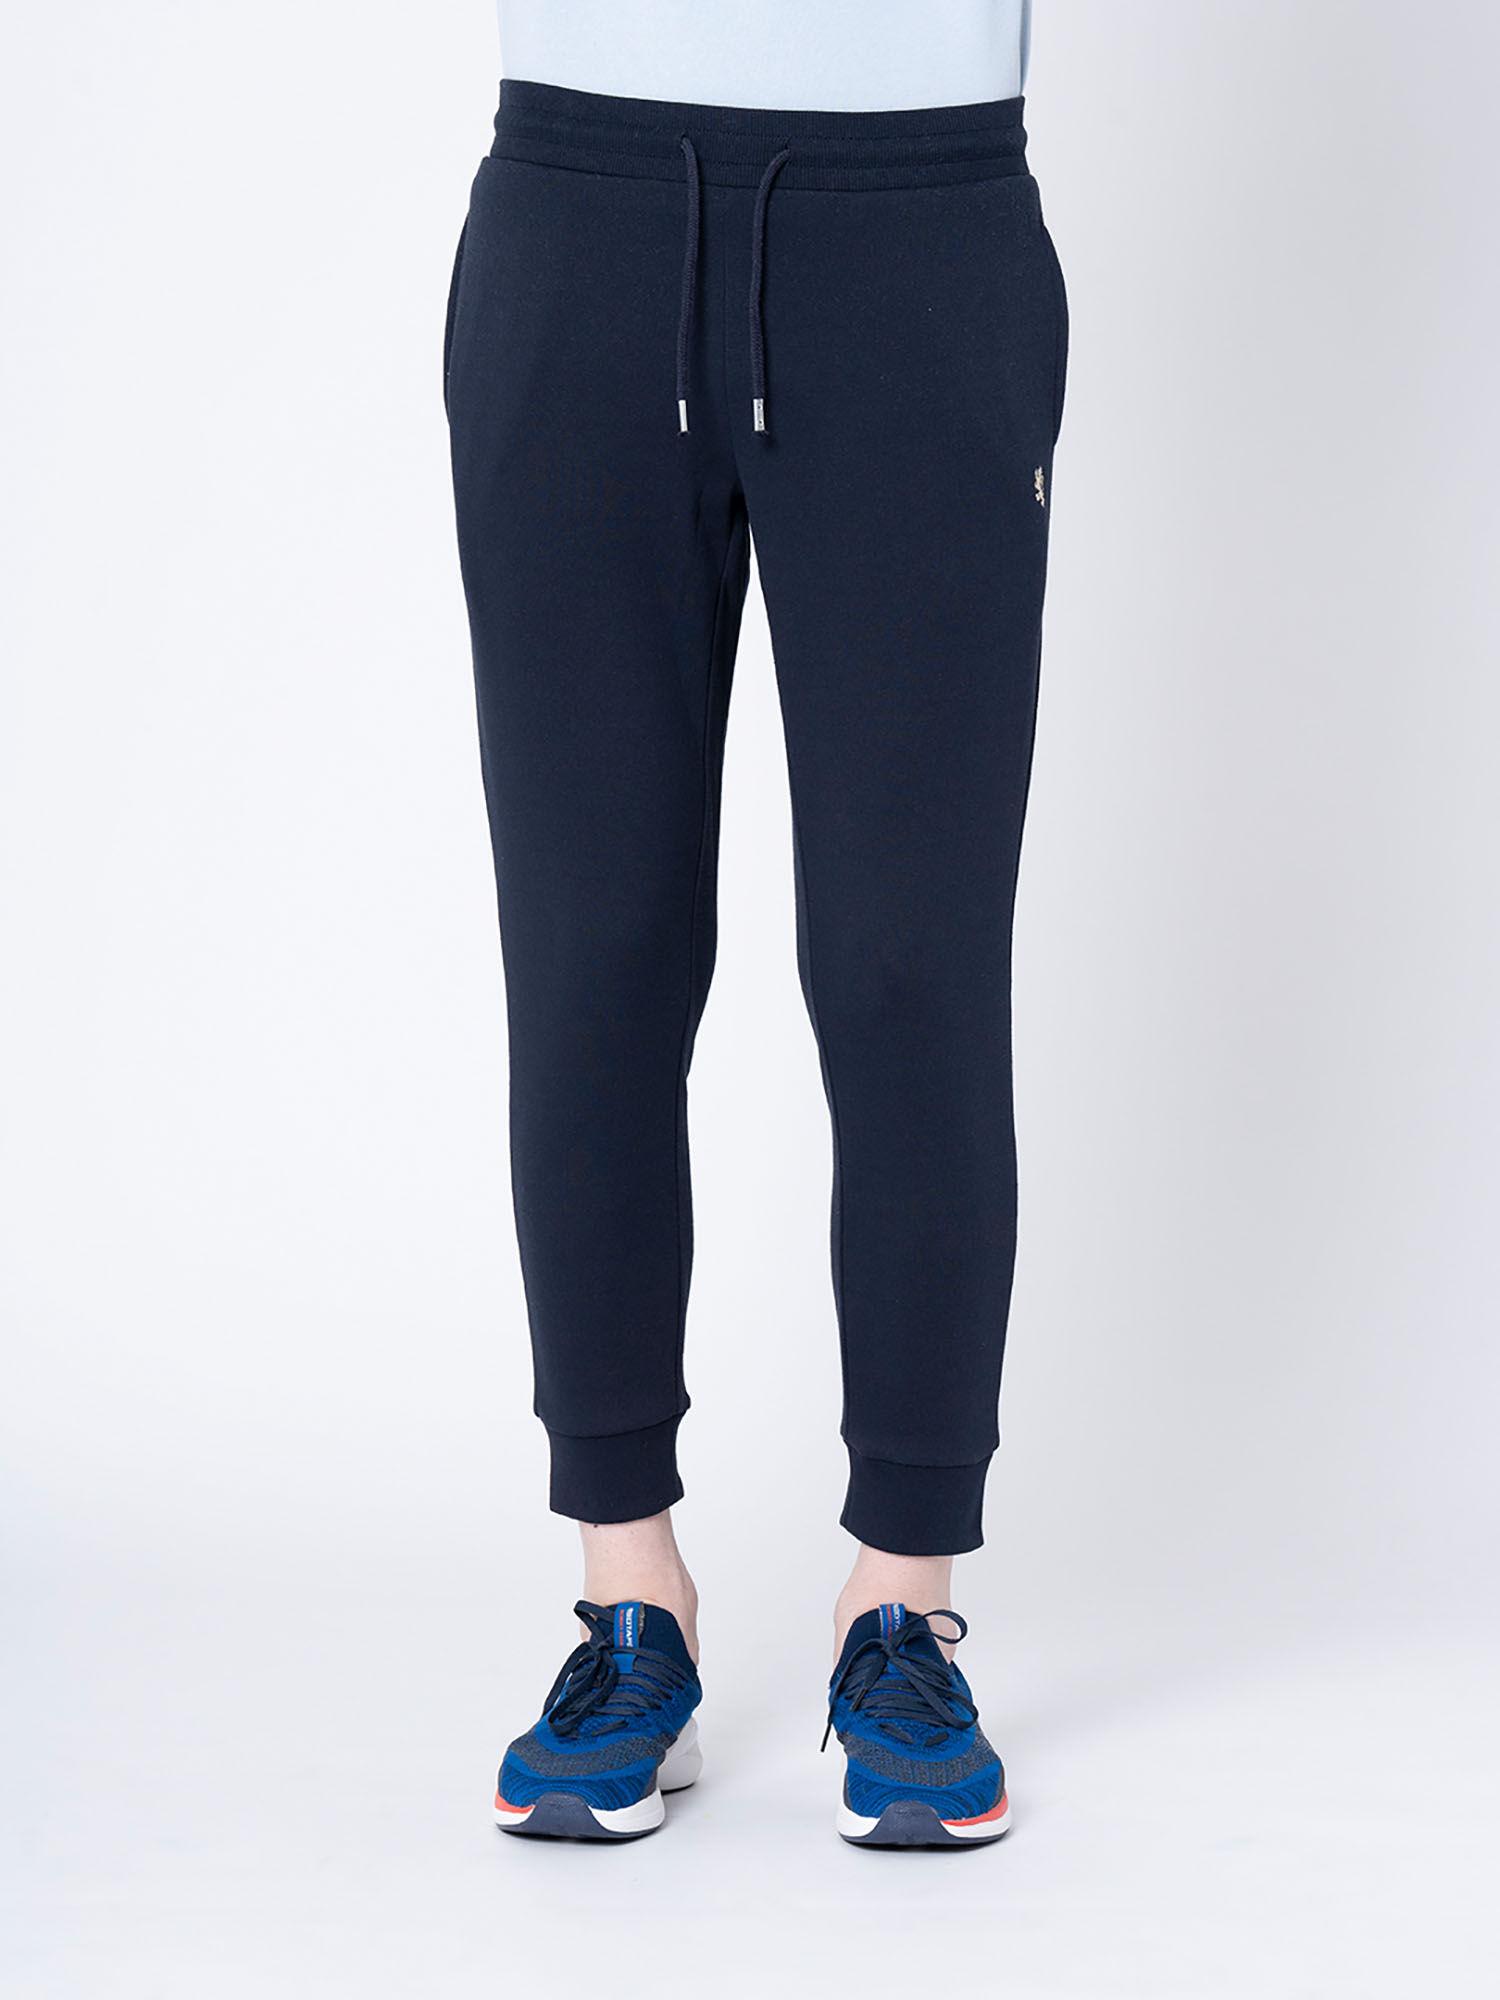 mens-navy-blue-poly-cotton-stretch-solid-joggers